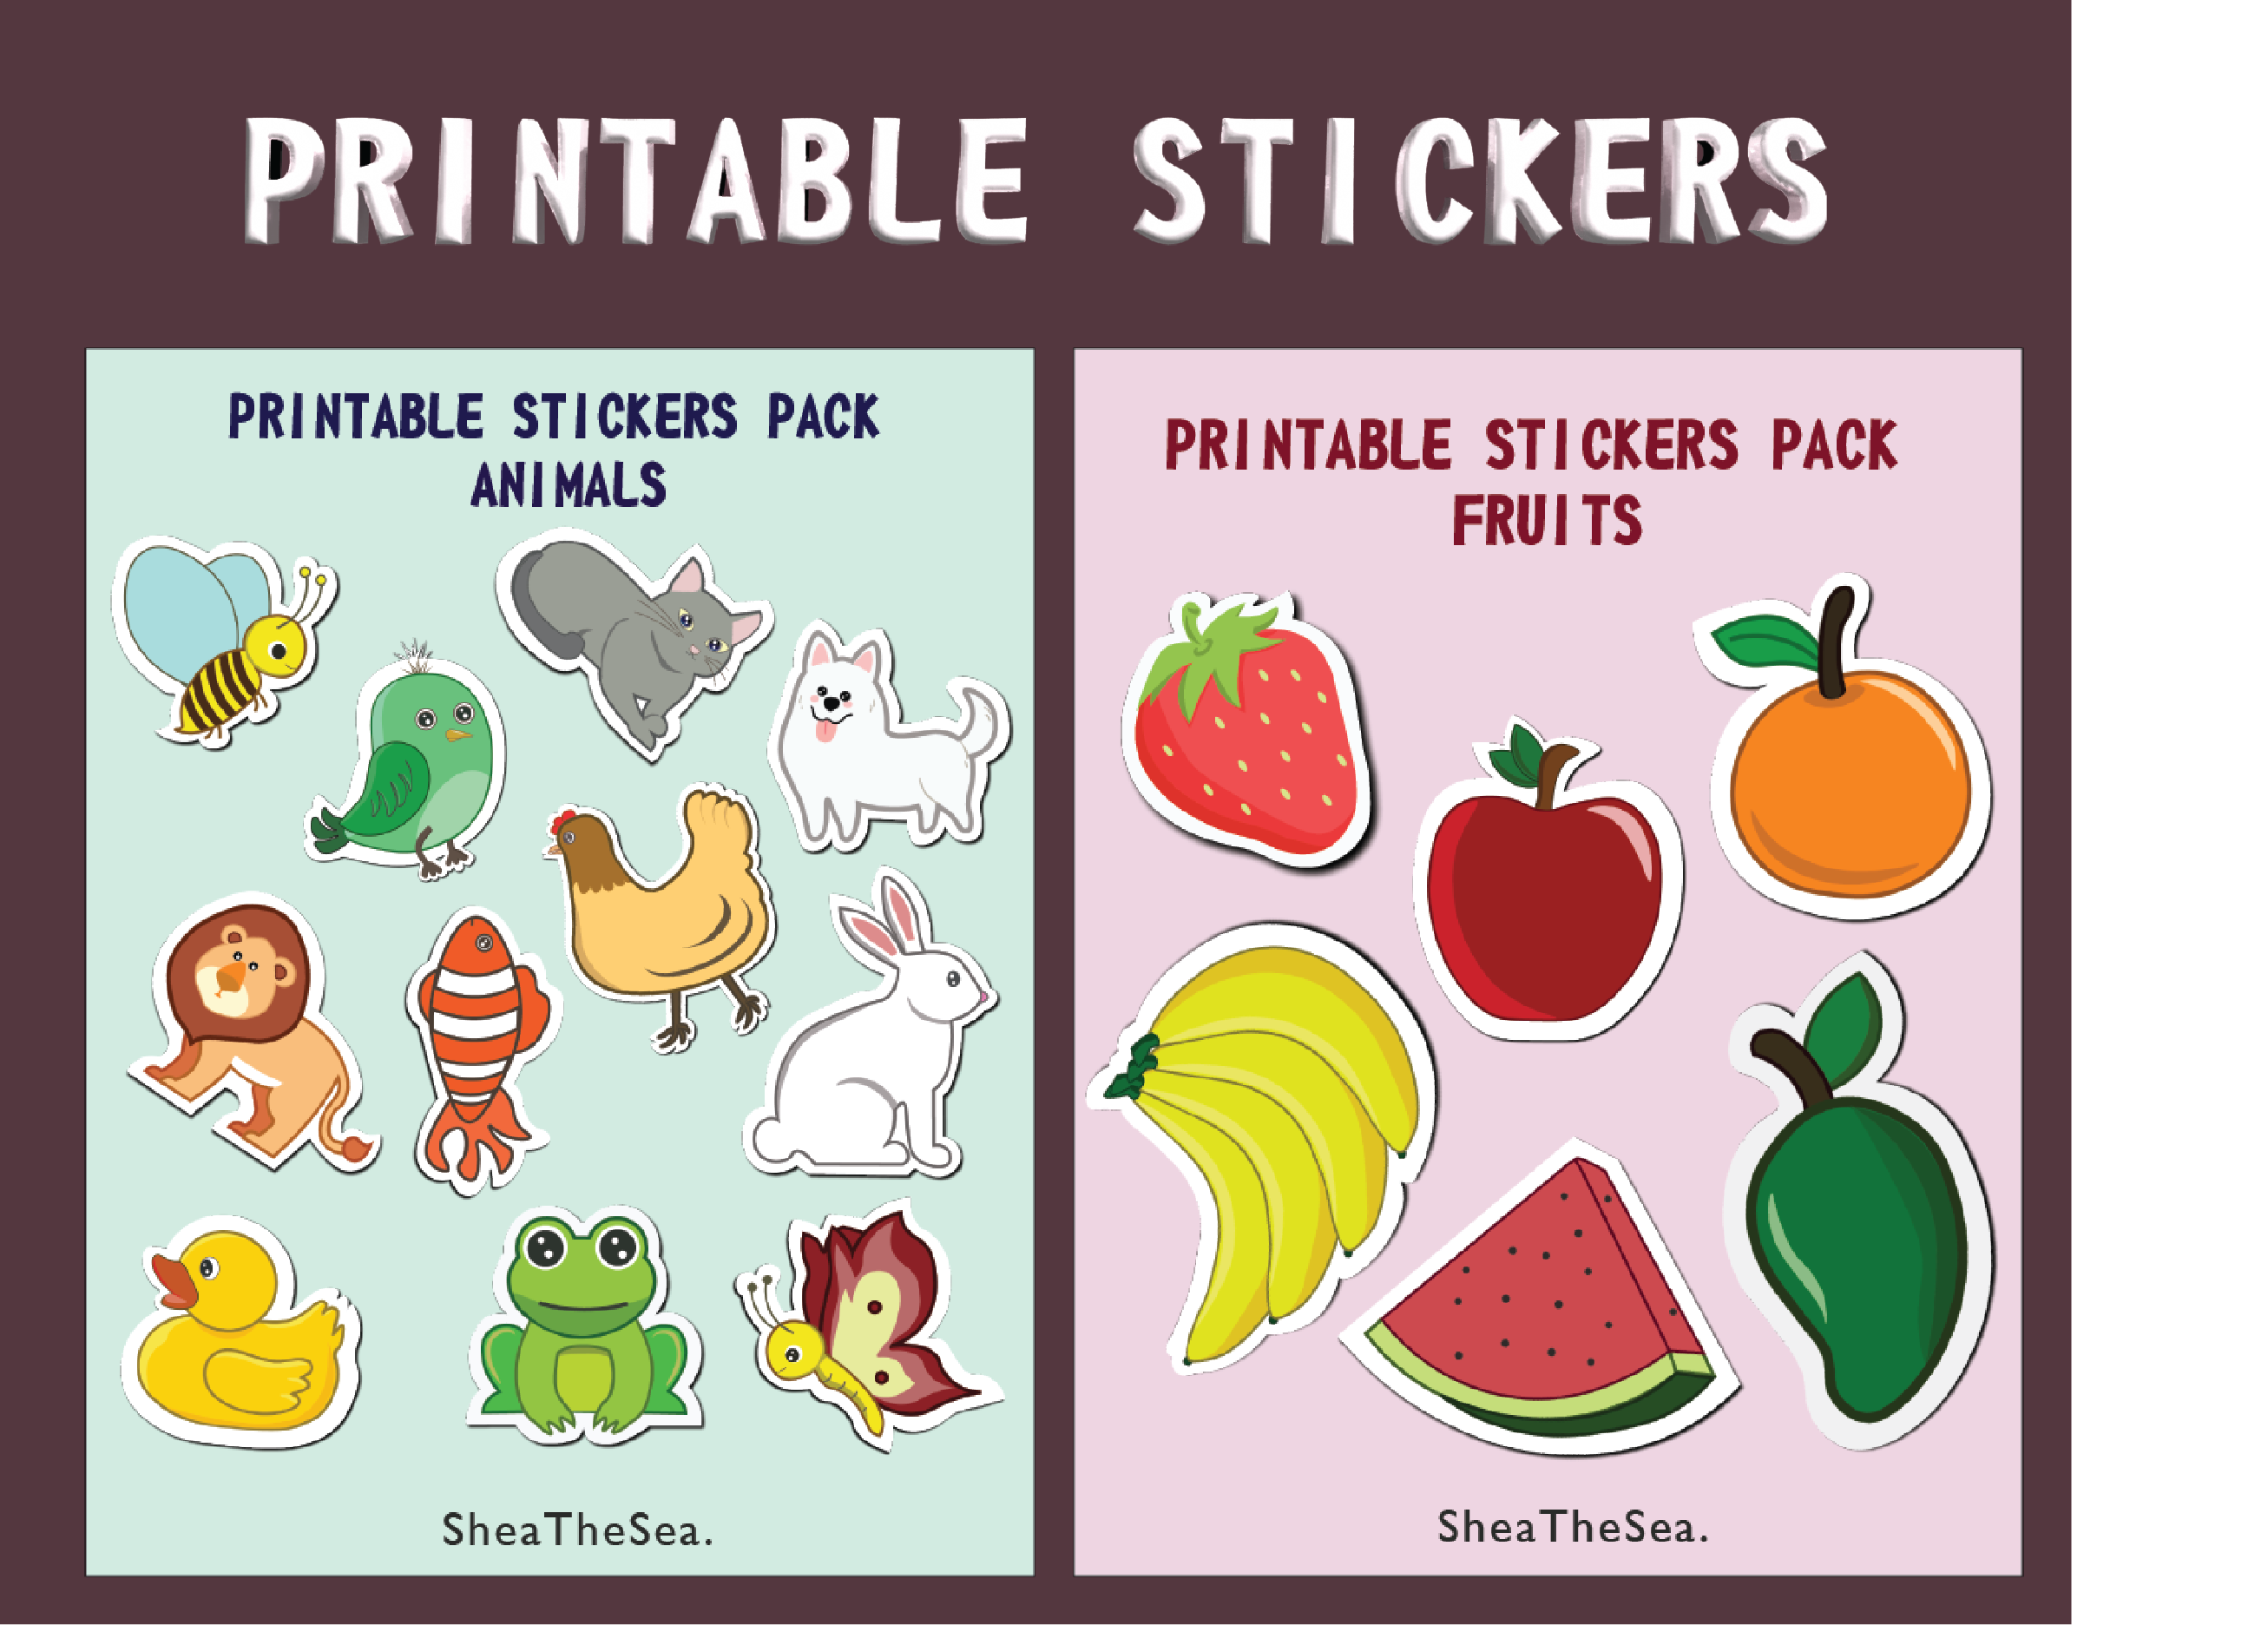 printable-stickers-for-kids-by-sheathesea-on-dribbble